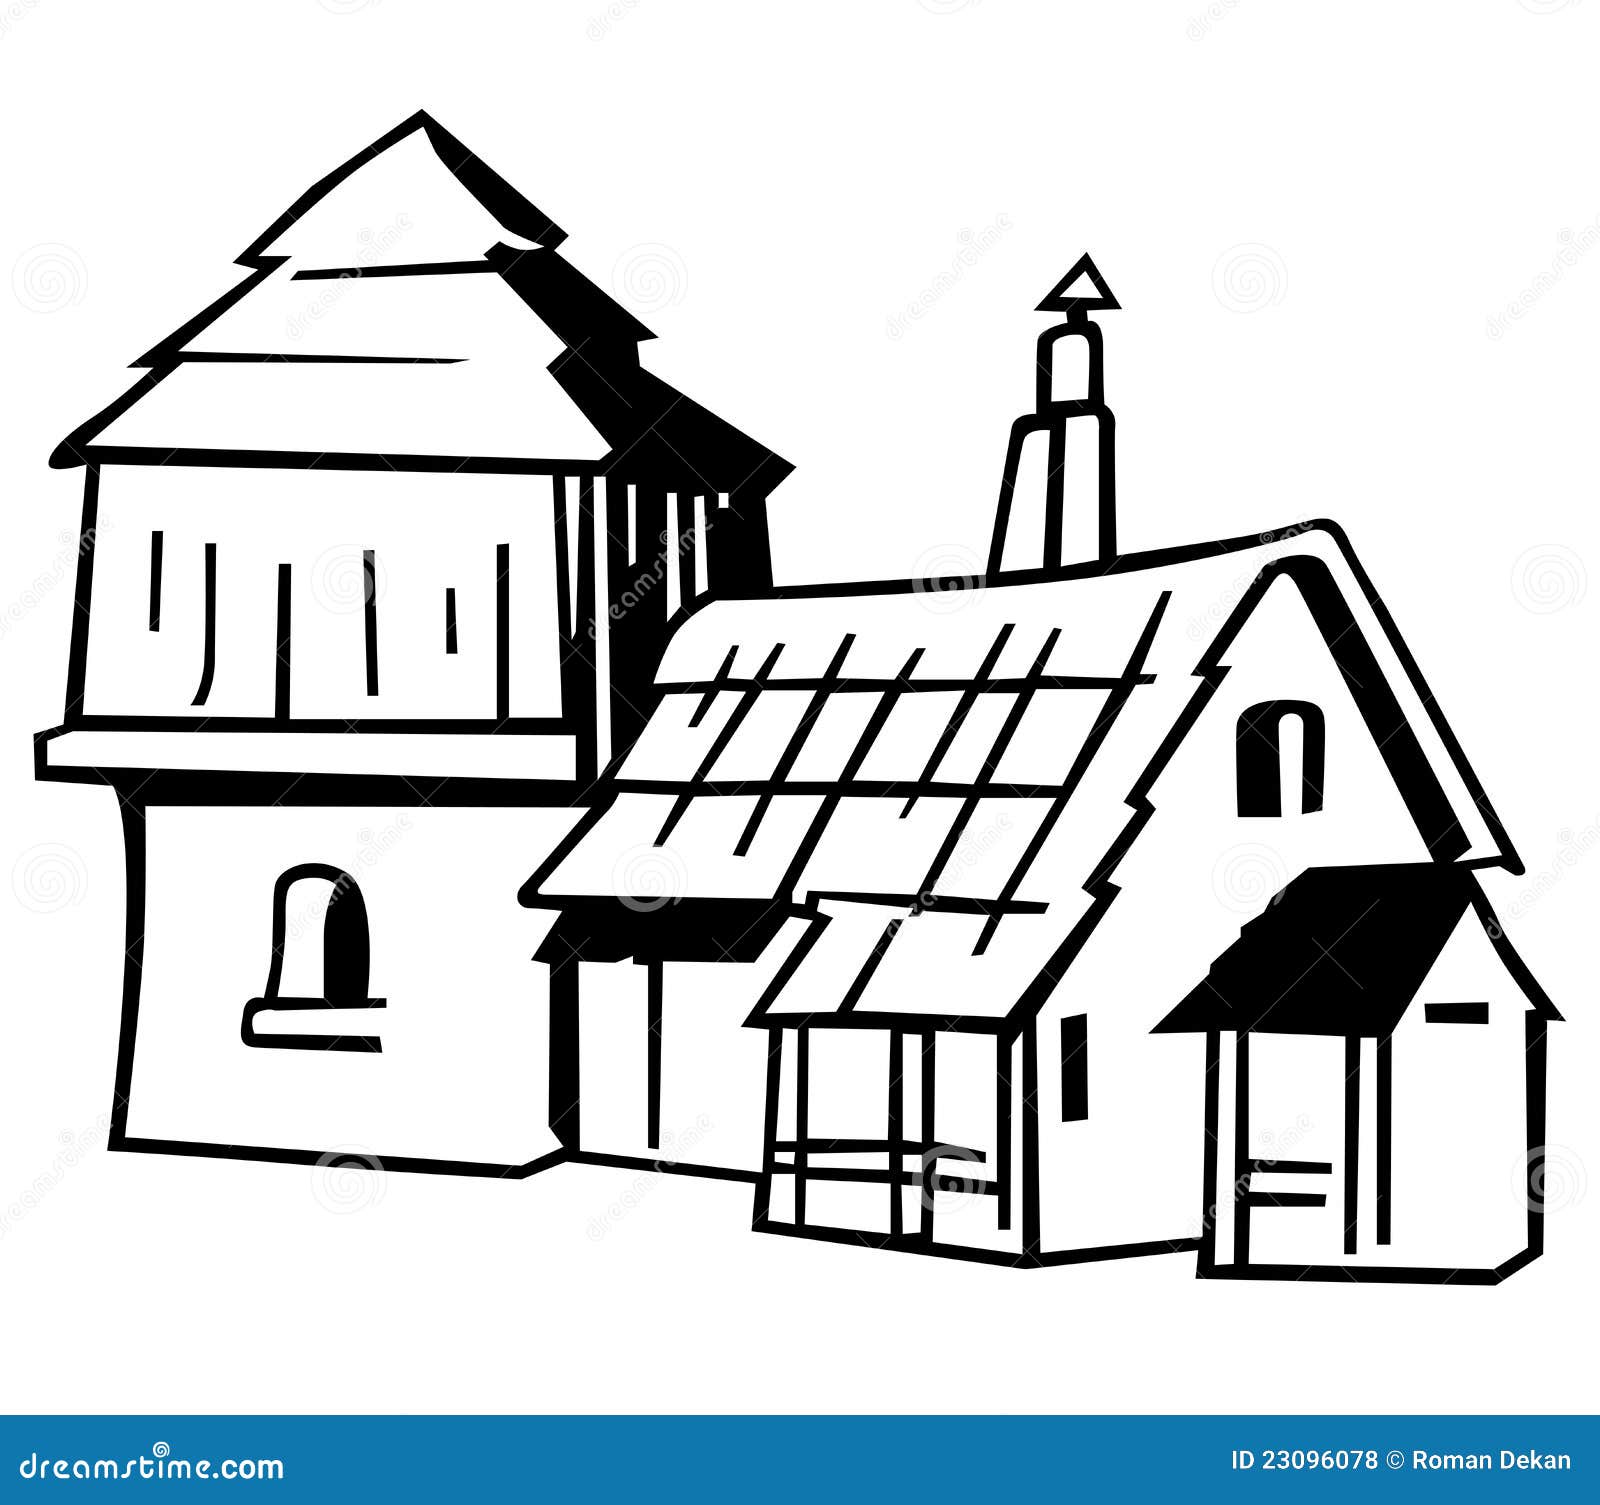 clipart pictures of villages - photo #42